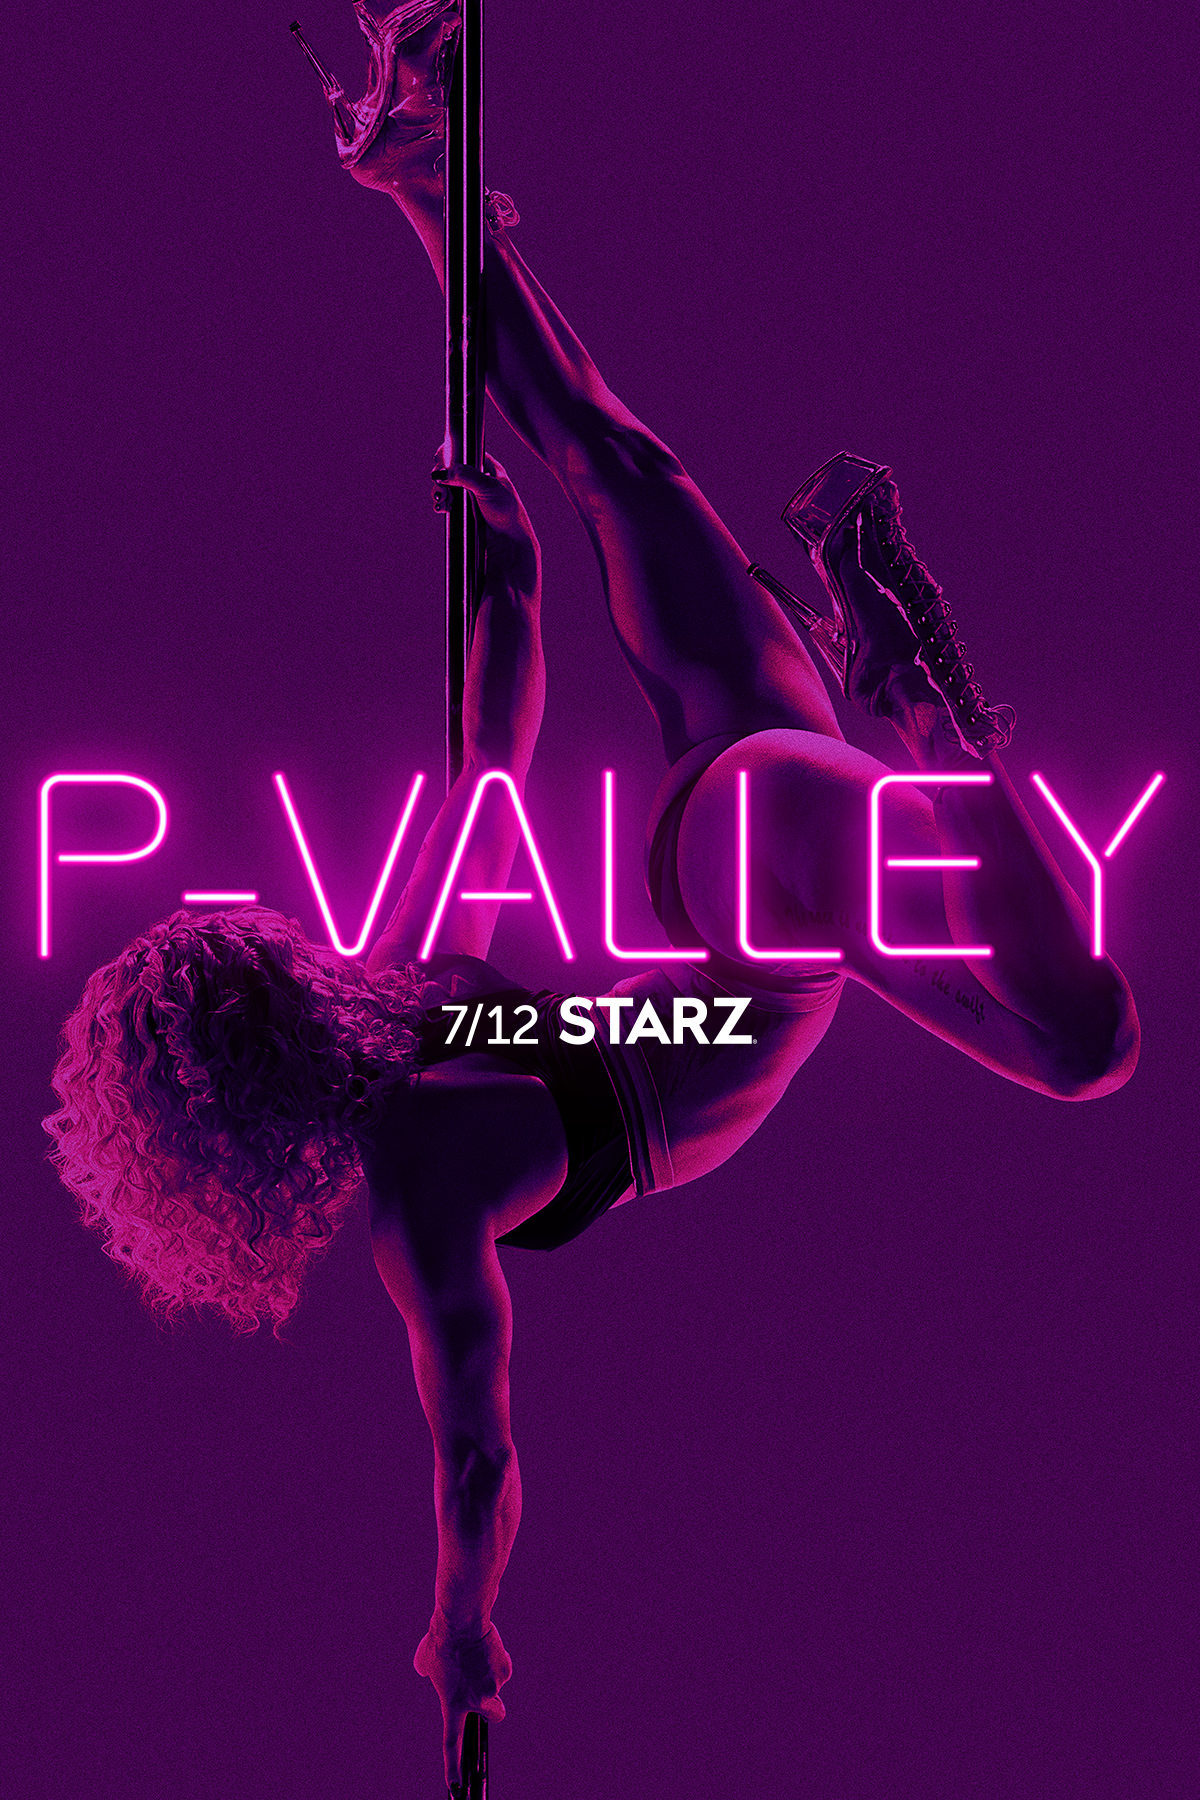 STARZ Reveals Official Trailer And Key Art For New Series "PValley"